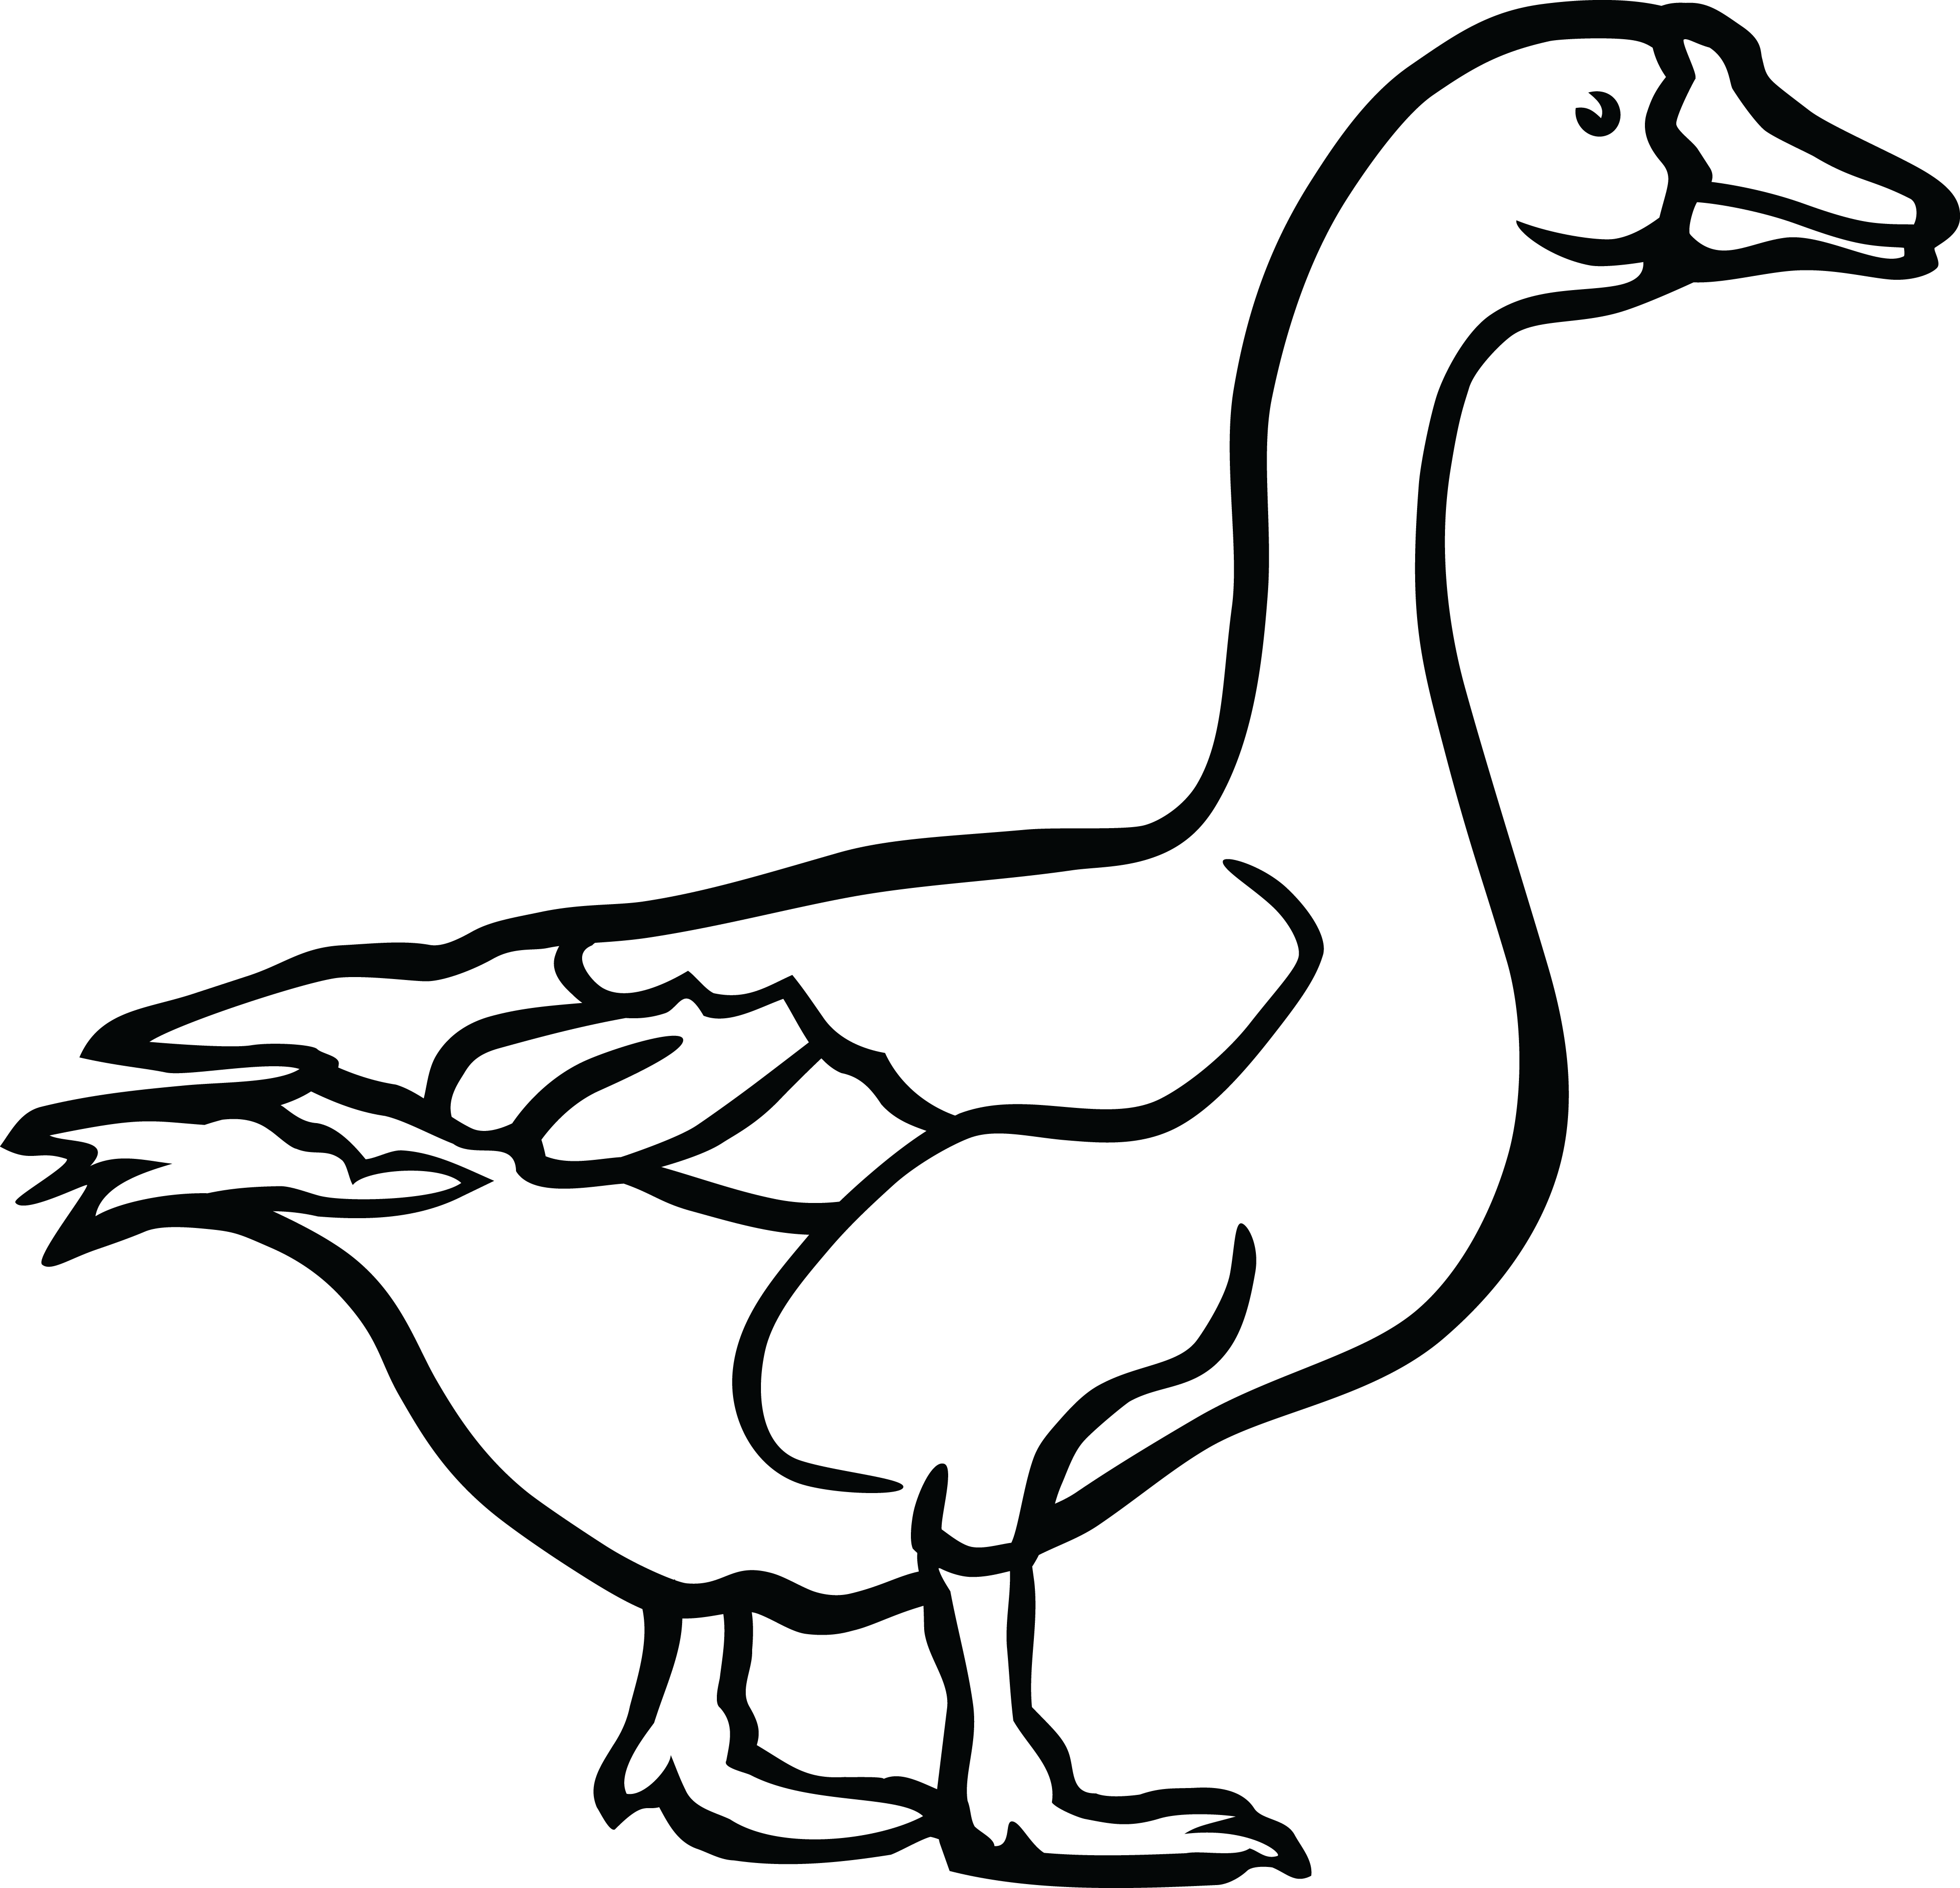  collection of duck. Duckling clipart black and white